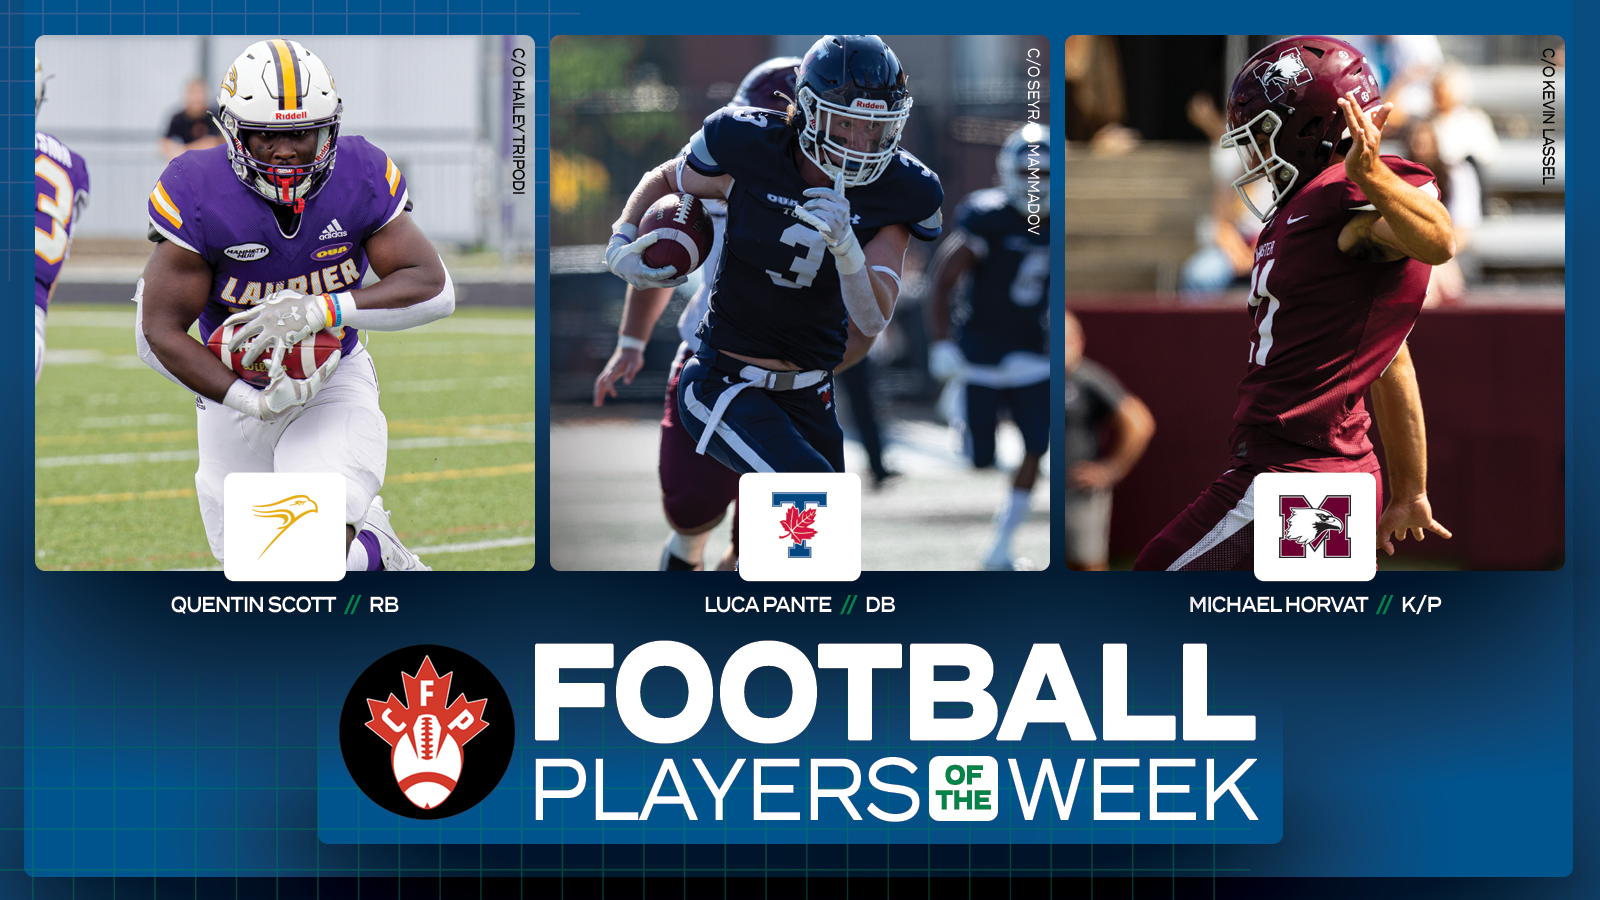 Graphic on predominantly blue background featuring action photos of Quentin Scott, Luca Pante, and Michael Horvat with their name and school logos placed beneath their respective photos, along with the Canadian Football Perspective logo and white text that reads 'Football Players of the Week' in the lower third